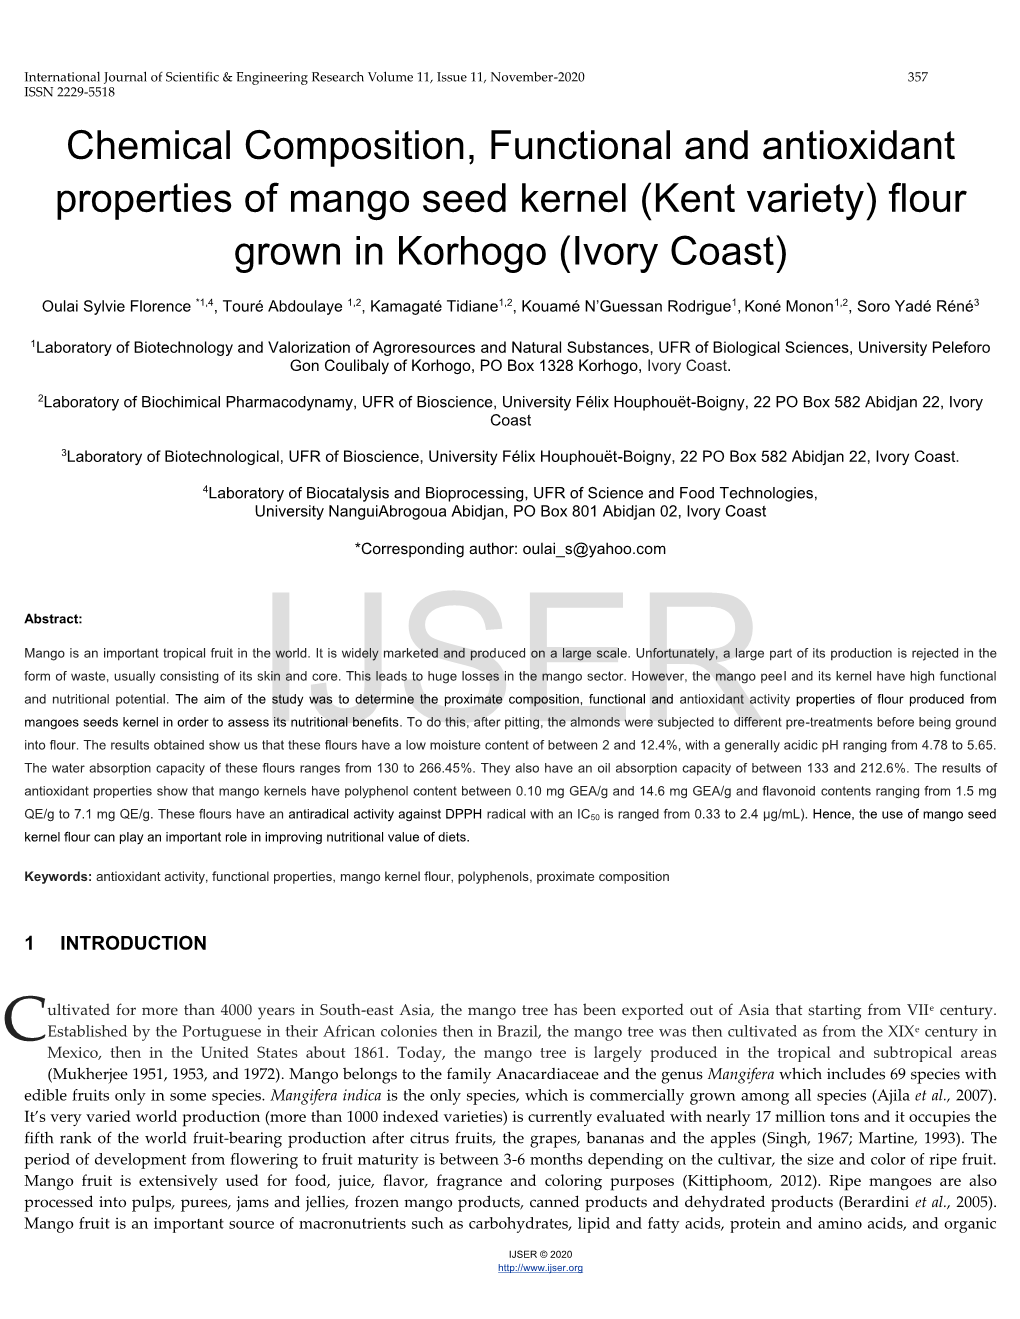 Chemical Composition, Functional and Antioxidant Properties of Mango Seed Kernel (Kent Variety) Flour Grown in Korhogo (Ivory Coast)